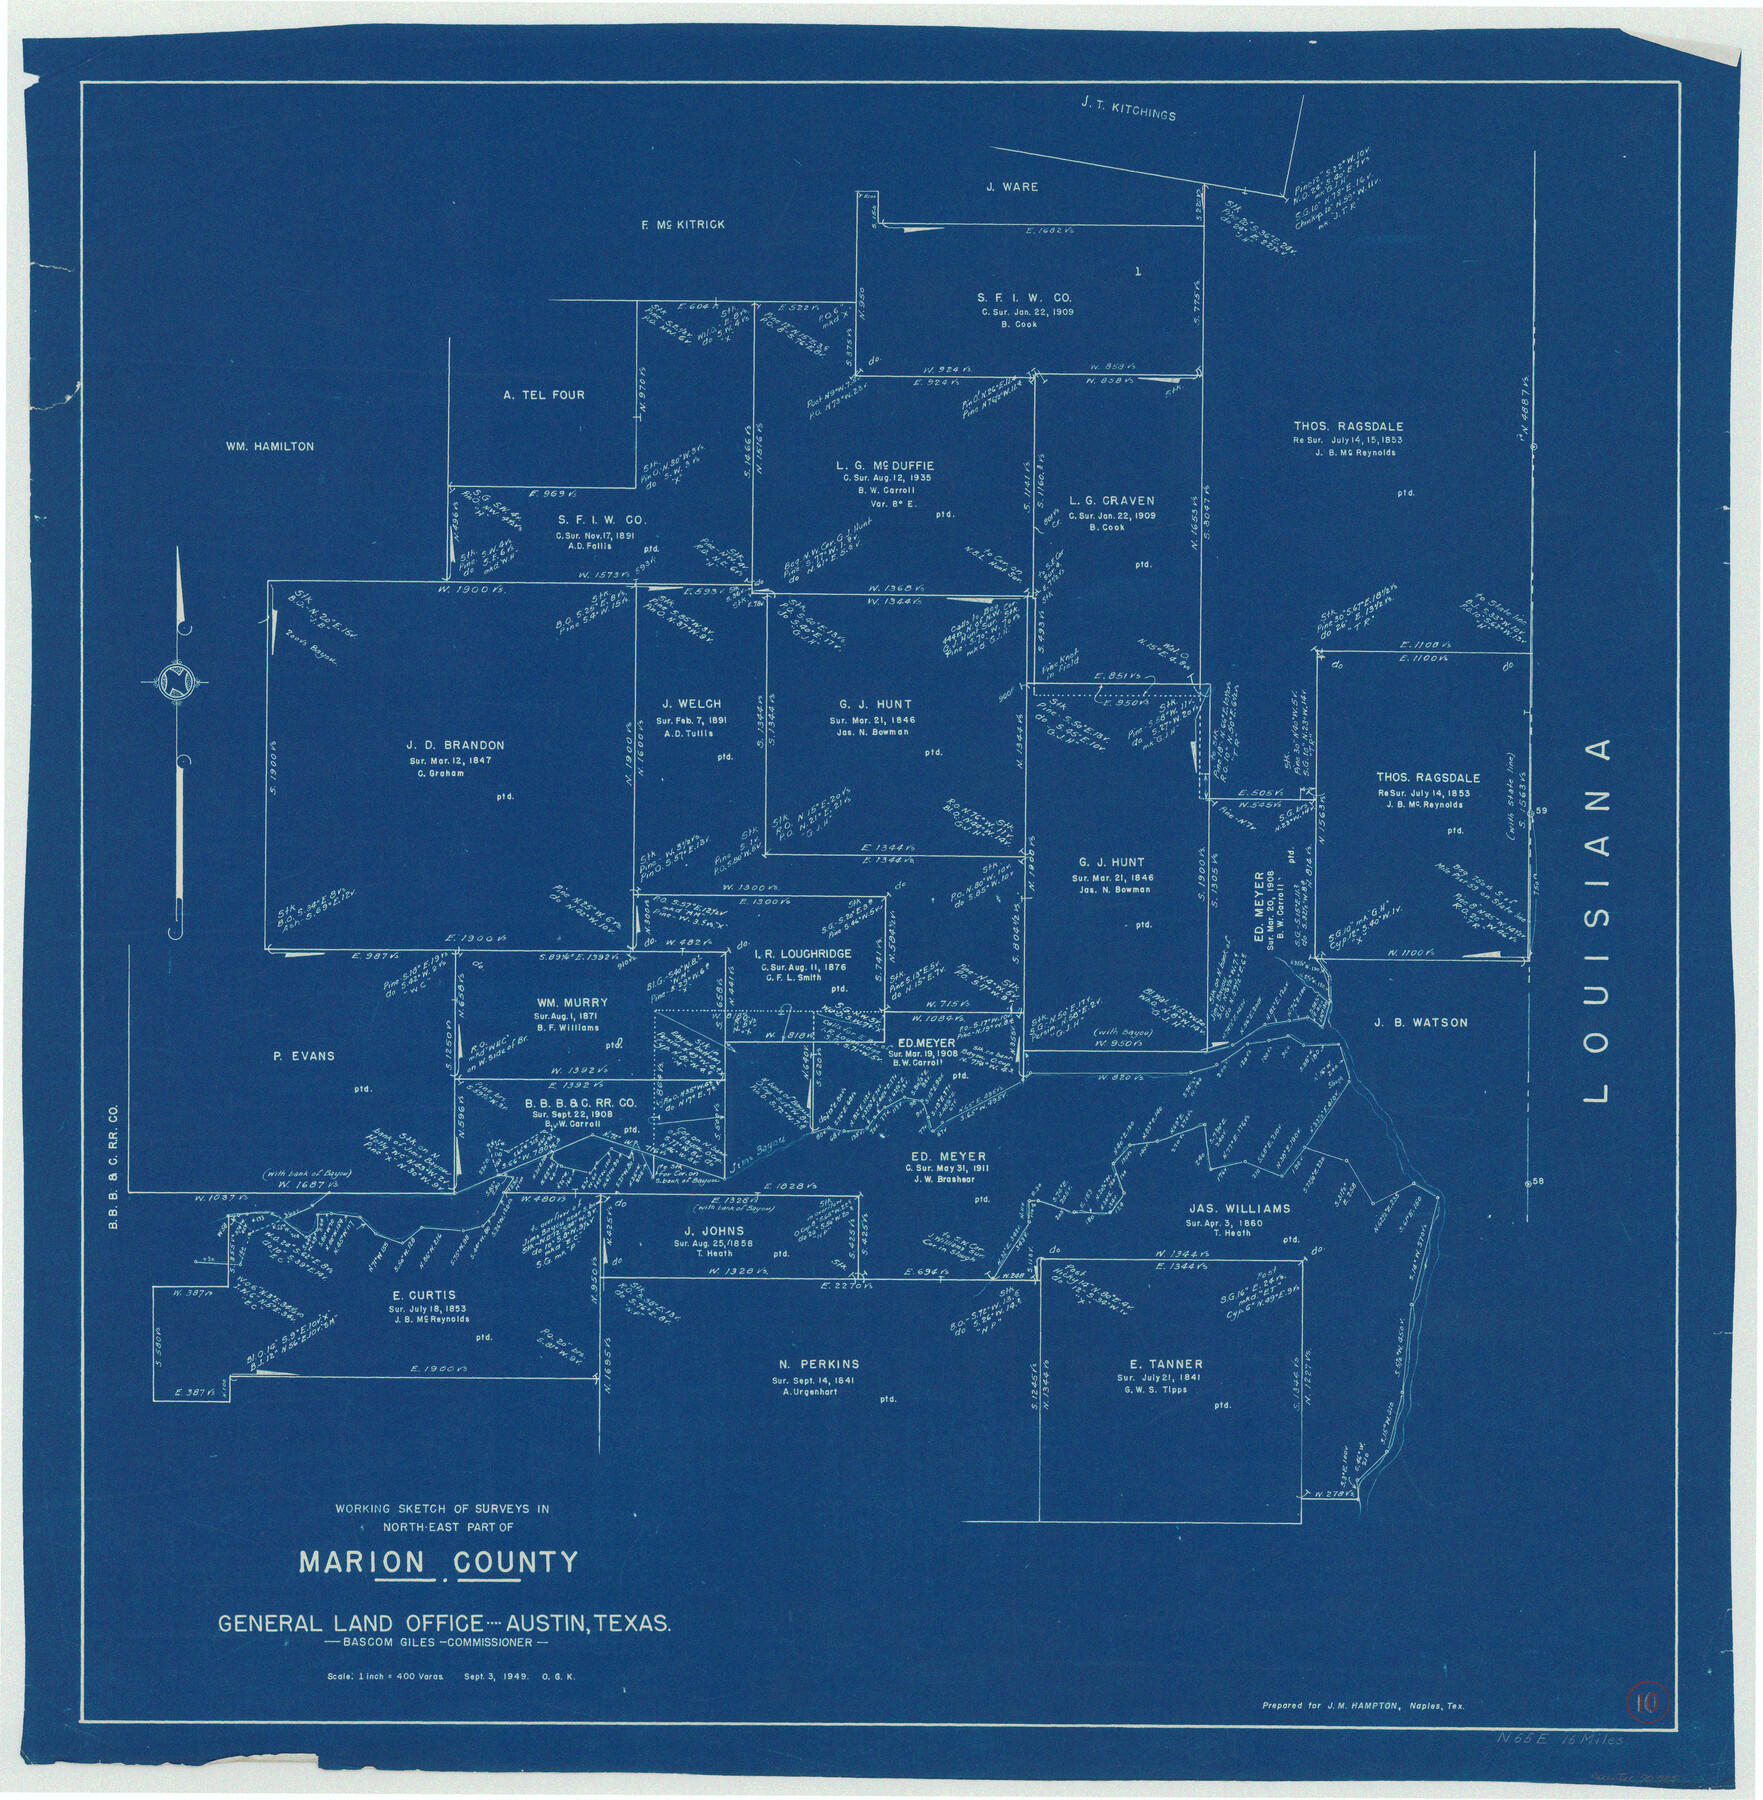 70785, Marion County Working Sketch 10, General Map Collection